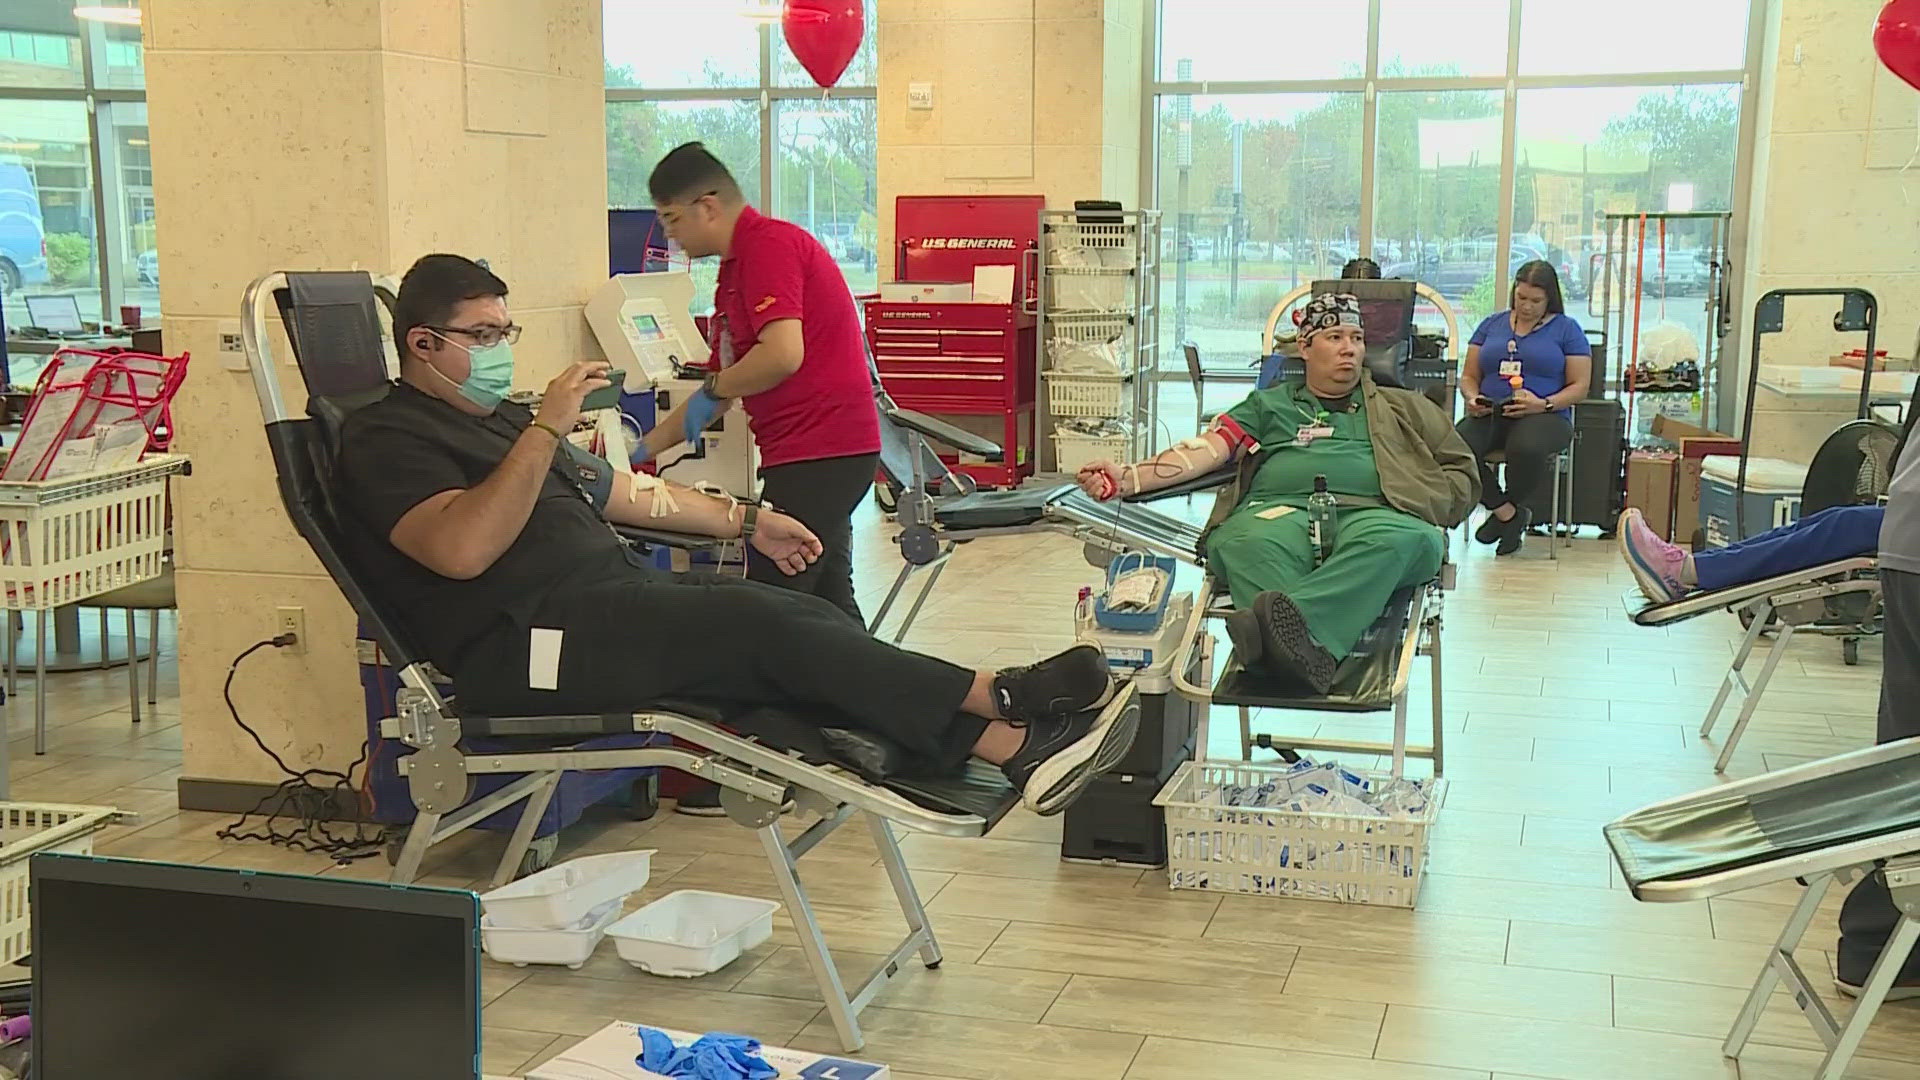 With summer fast approaching, the need for blood donations goes up. Texas Blood and Tissue plans to offer festive incentives to those who donate until the 12th.